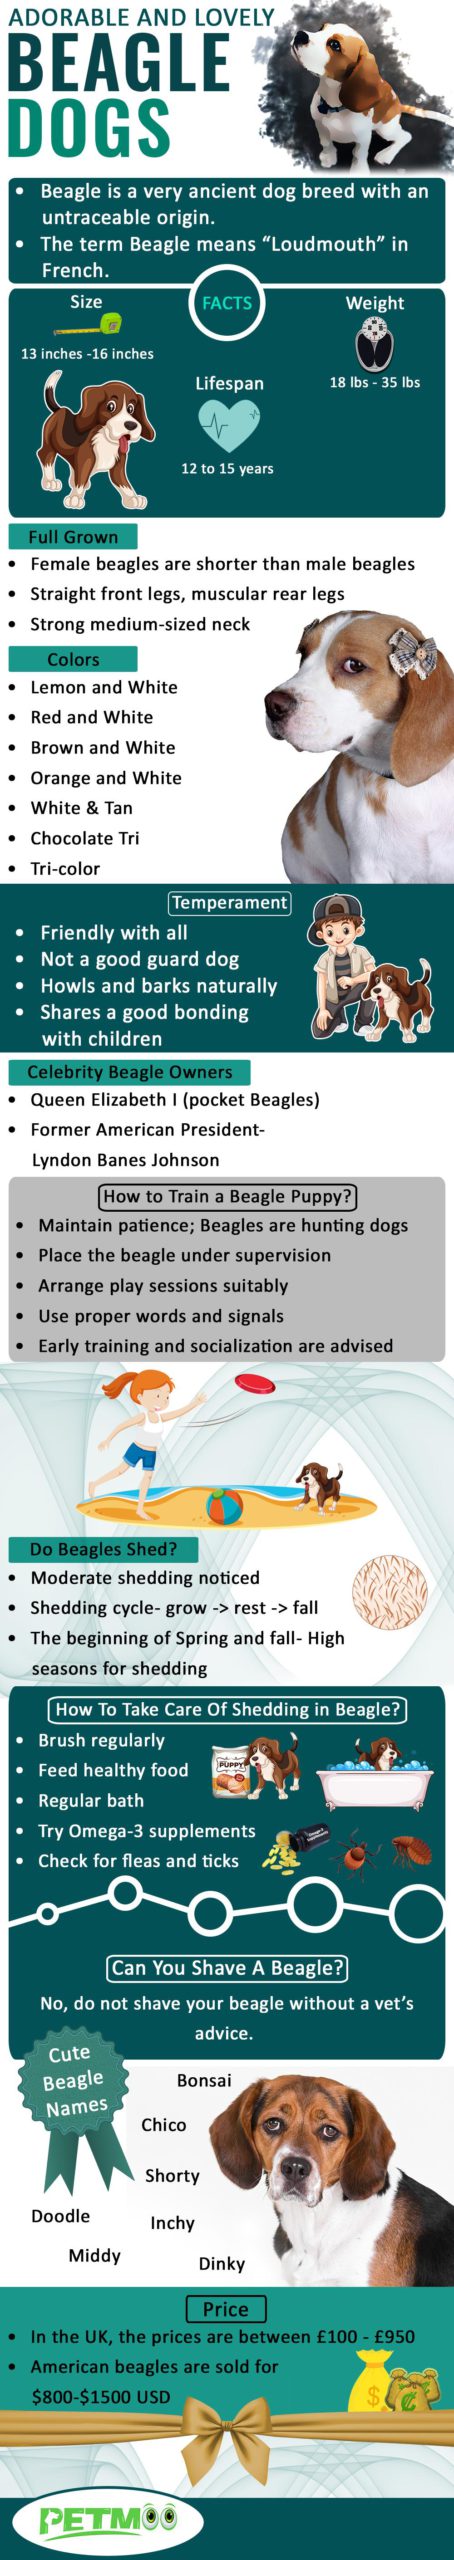 Infographic comparing the lifespan and health issues of Beagle and the other breed